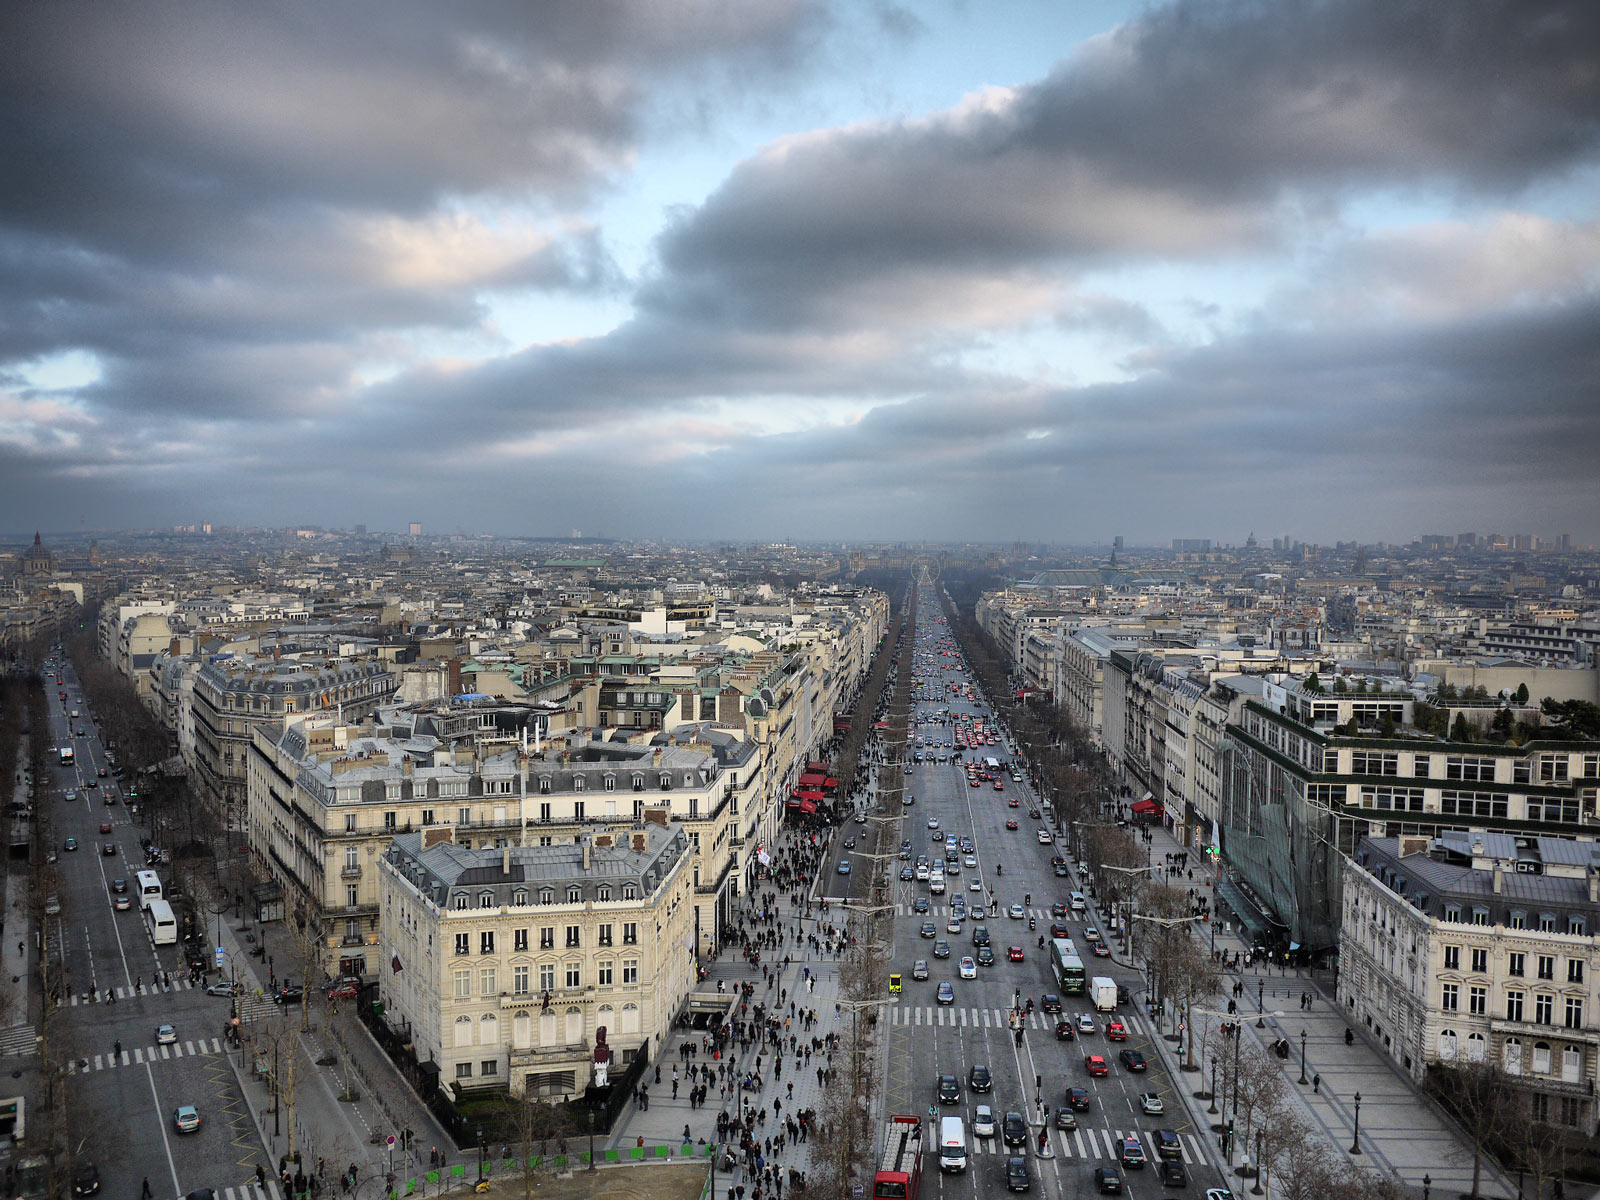 View Looking Down the Tree Lined Champs Elysees with Shoppers and